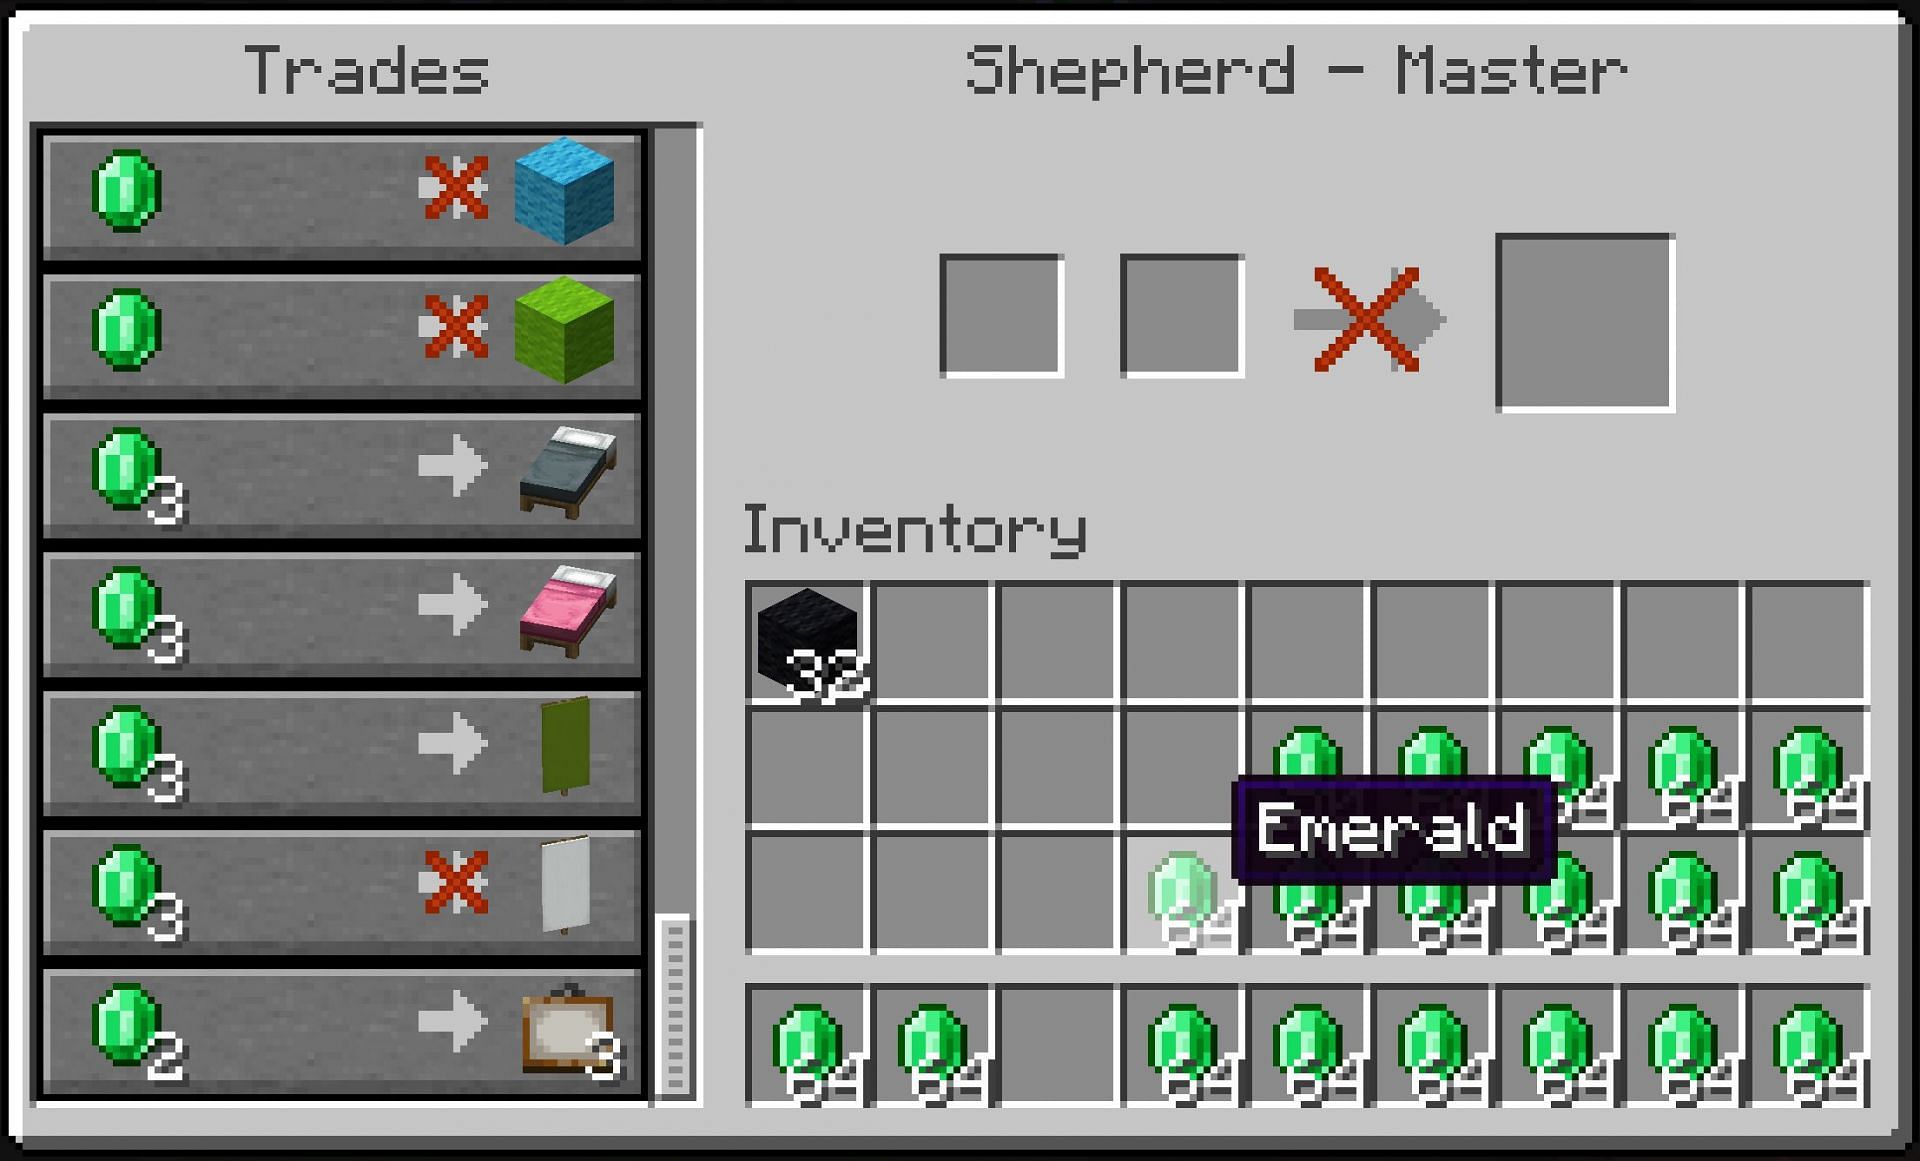 Shepherd trades are great for colorful building projects and map art (Image via Mojang)